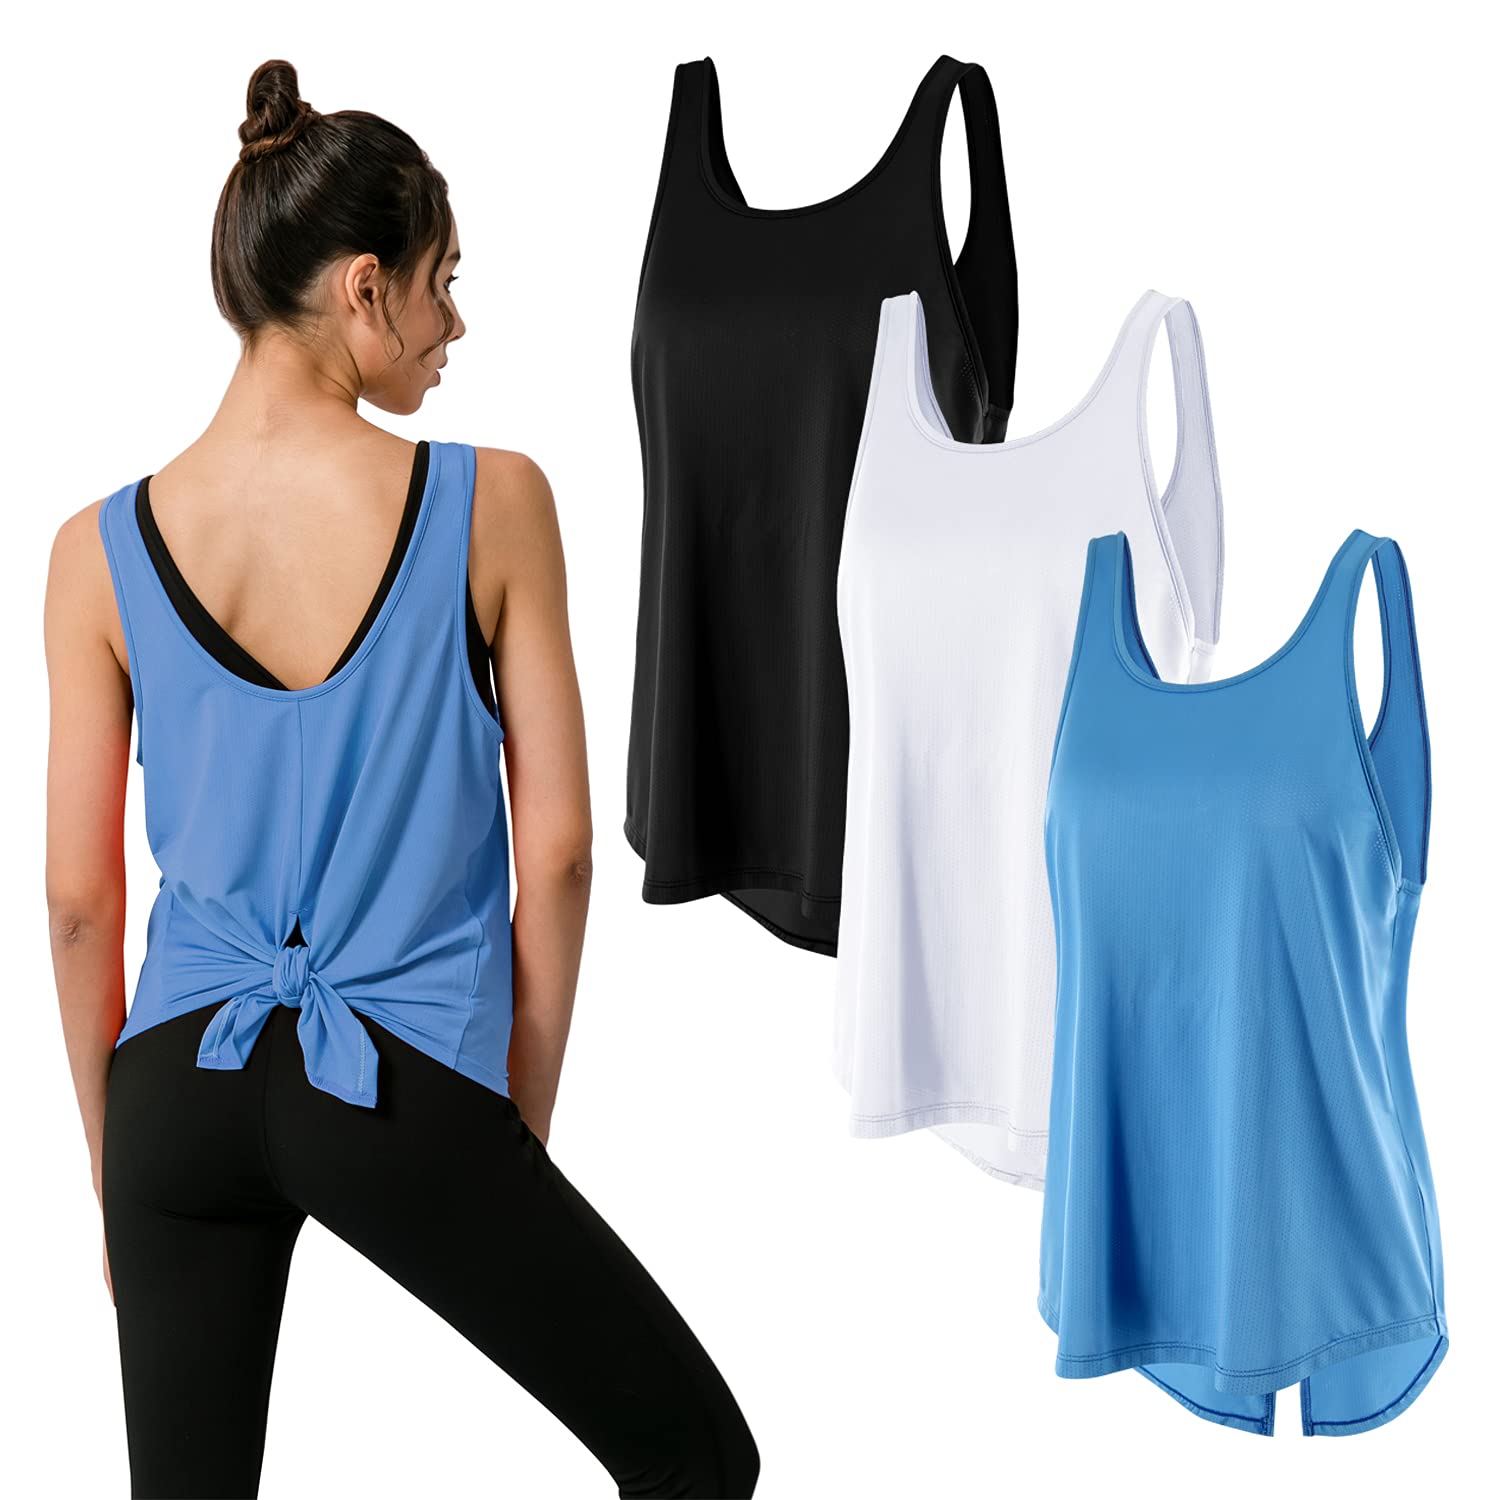 Extra Long Tank Tops for Womens Cotton Camisoles Gym Camis Running Workout  Shirts Yoga Tops 3 Packs Medium Size